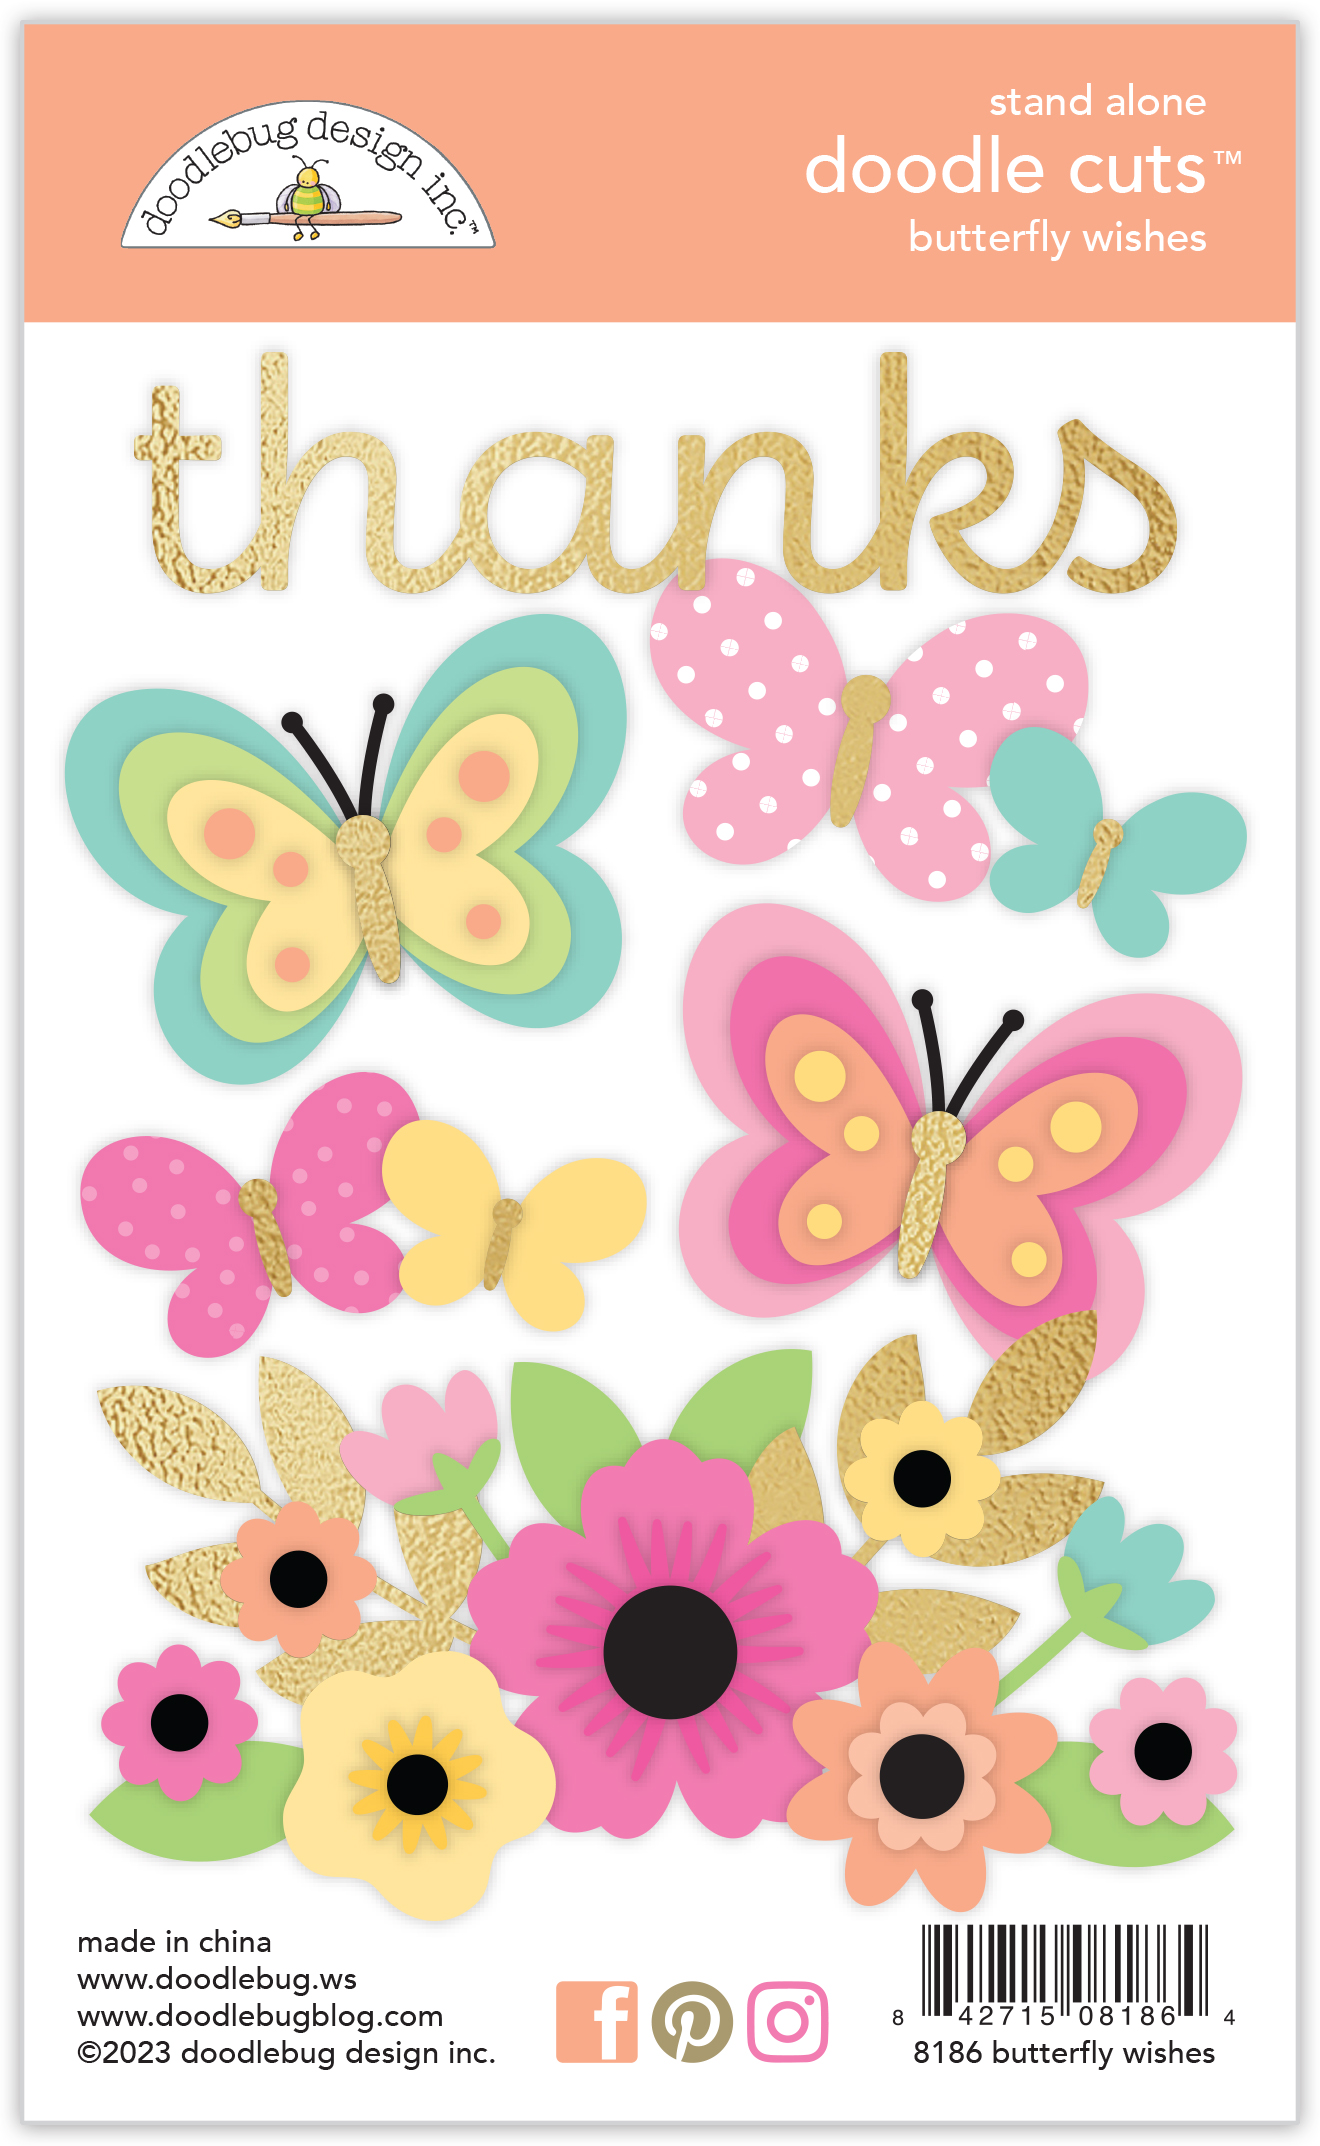 Doodlebug Butterfly Wishes Doodle Cut